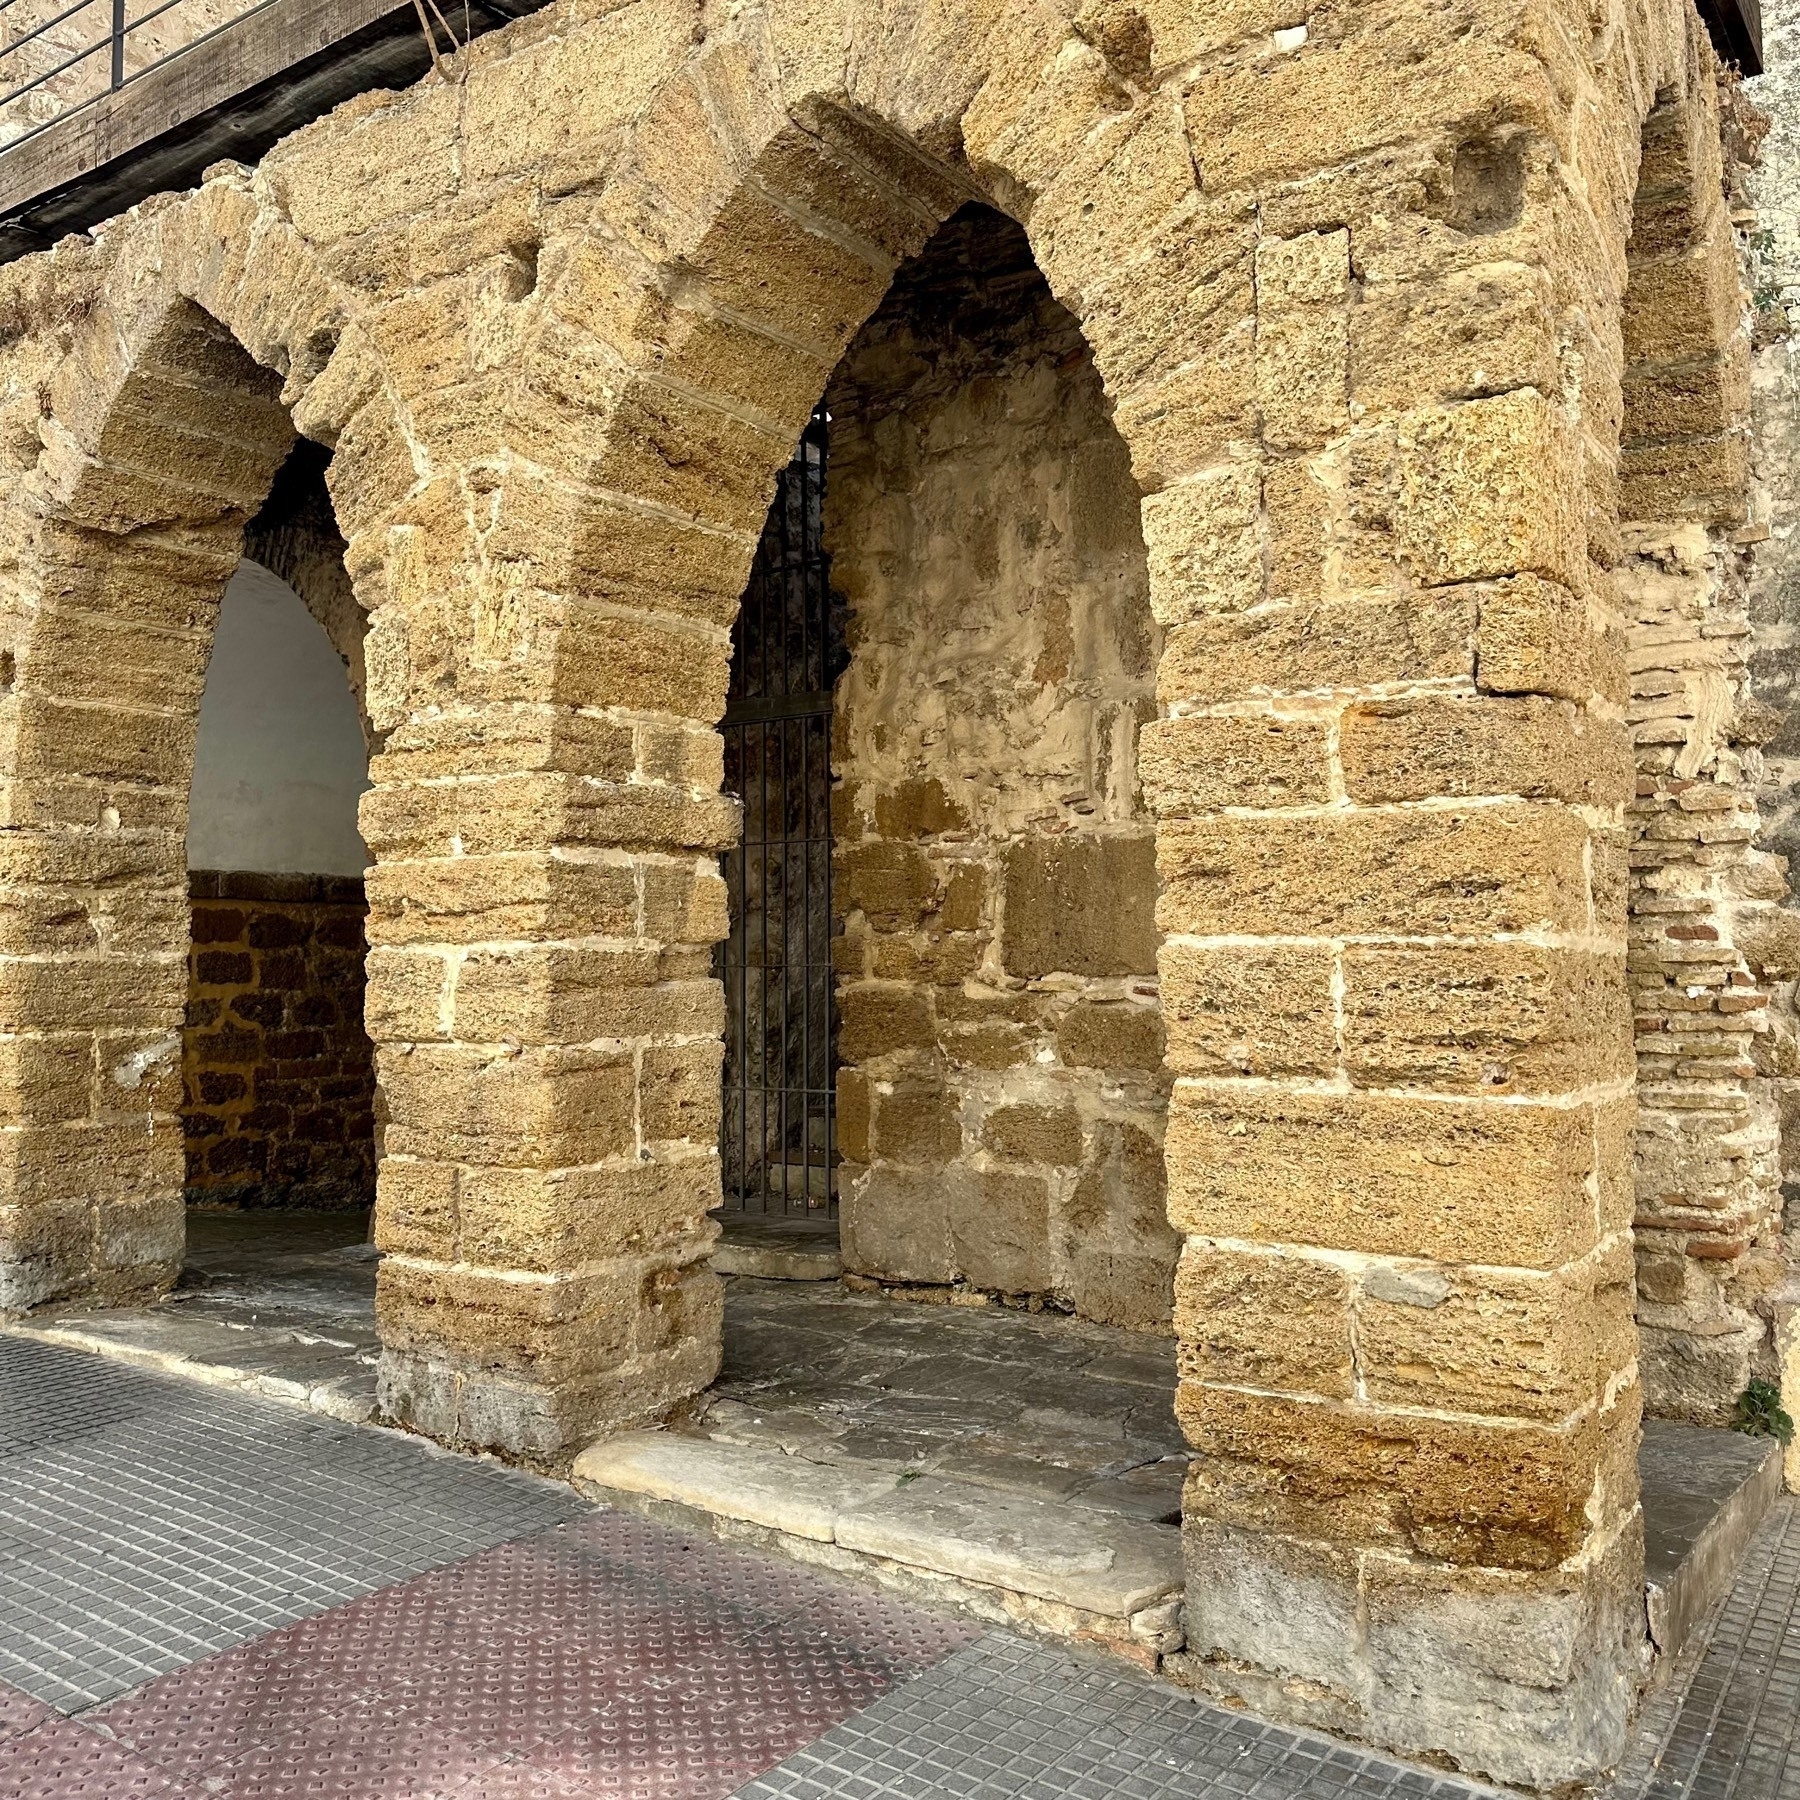 Three arches, pointed at the top, one at 90-degrees to the other two, and formed of yellow-coloured rough stone bricks